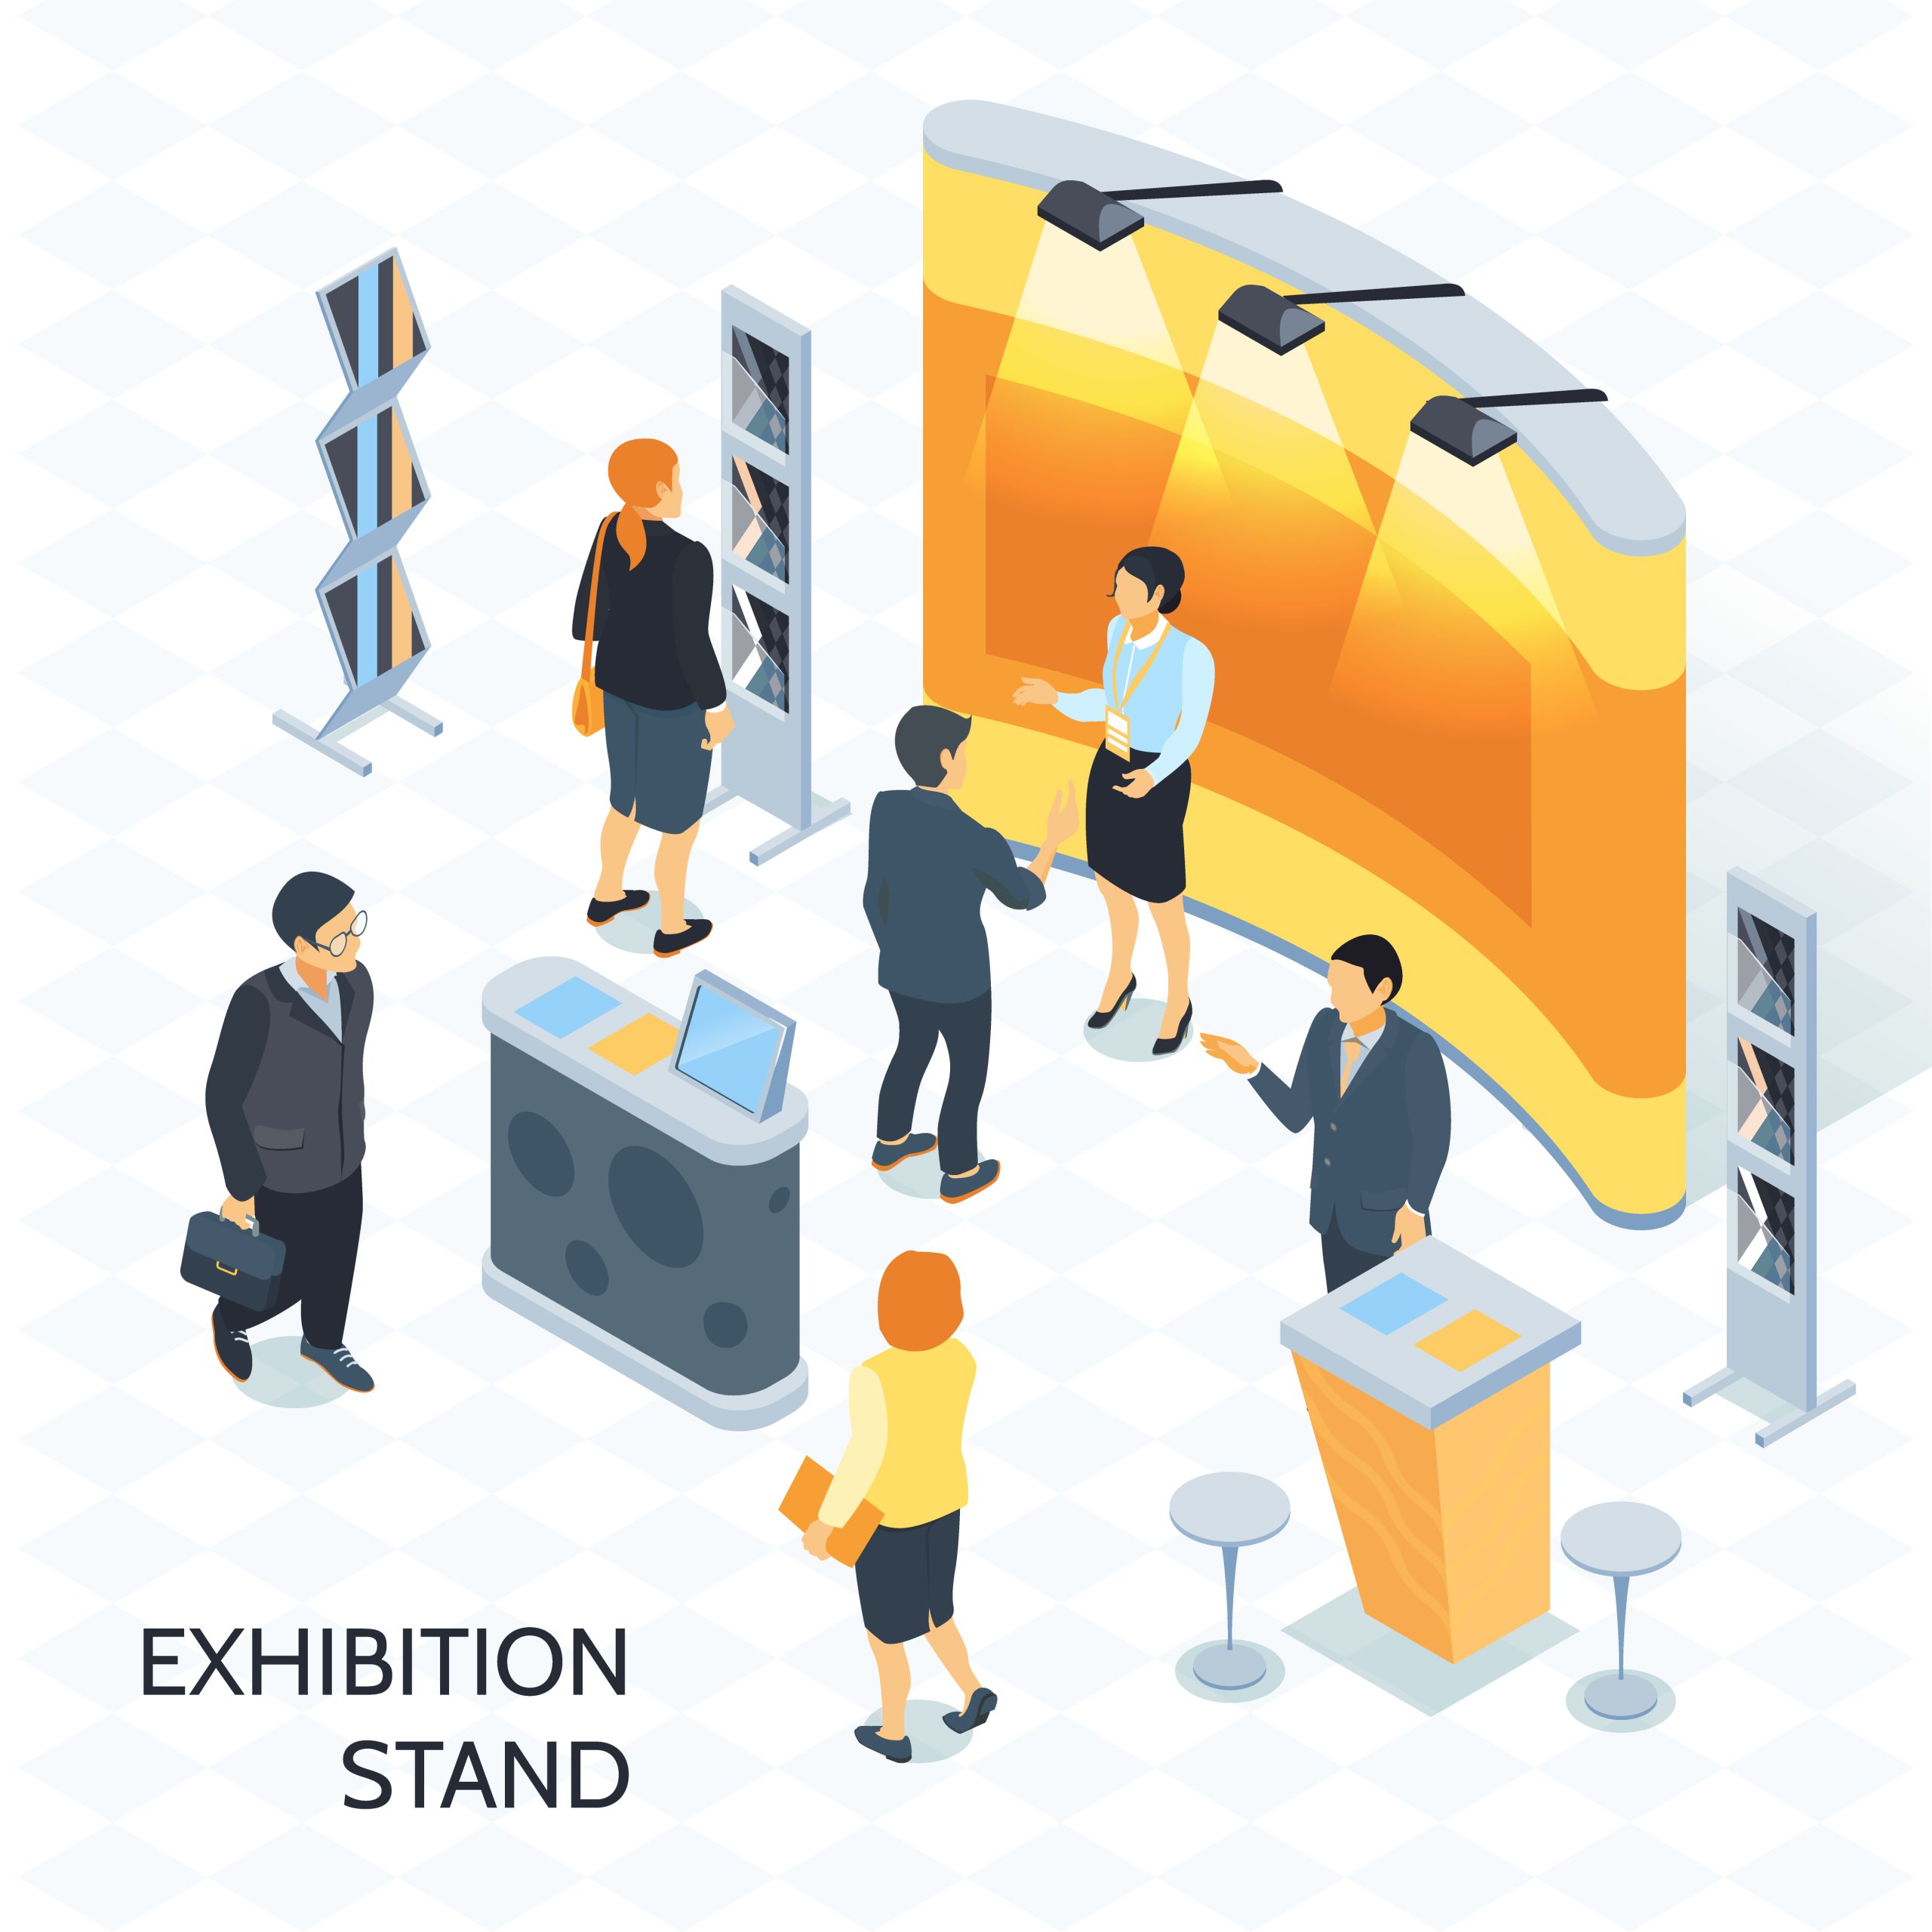 5 Display Stand Hacks to Make Your Exhibition Stand Pop